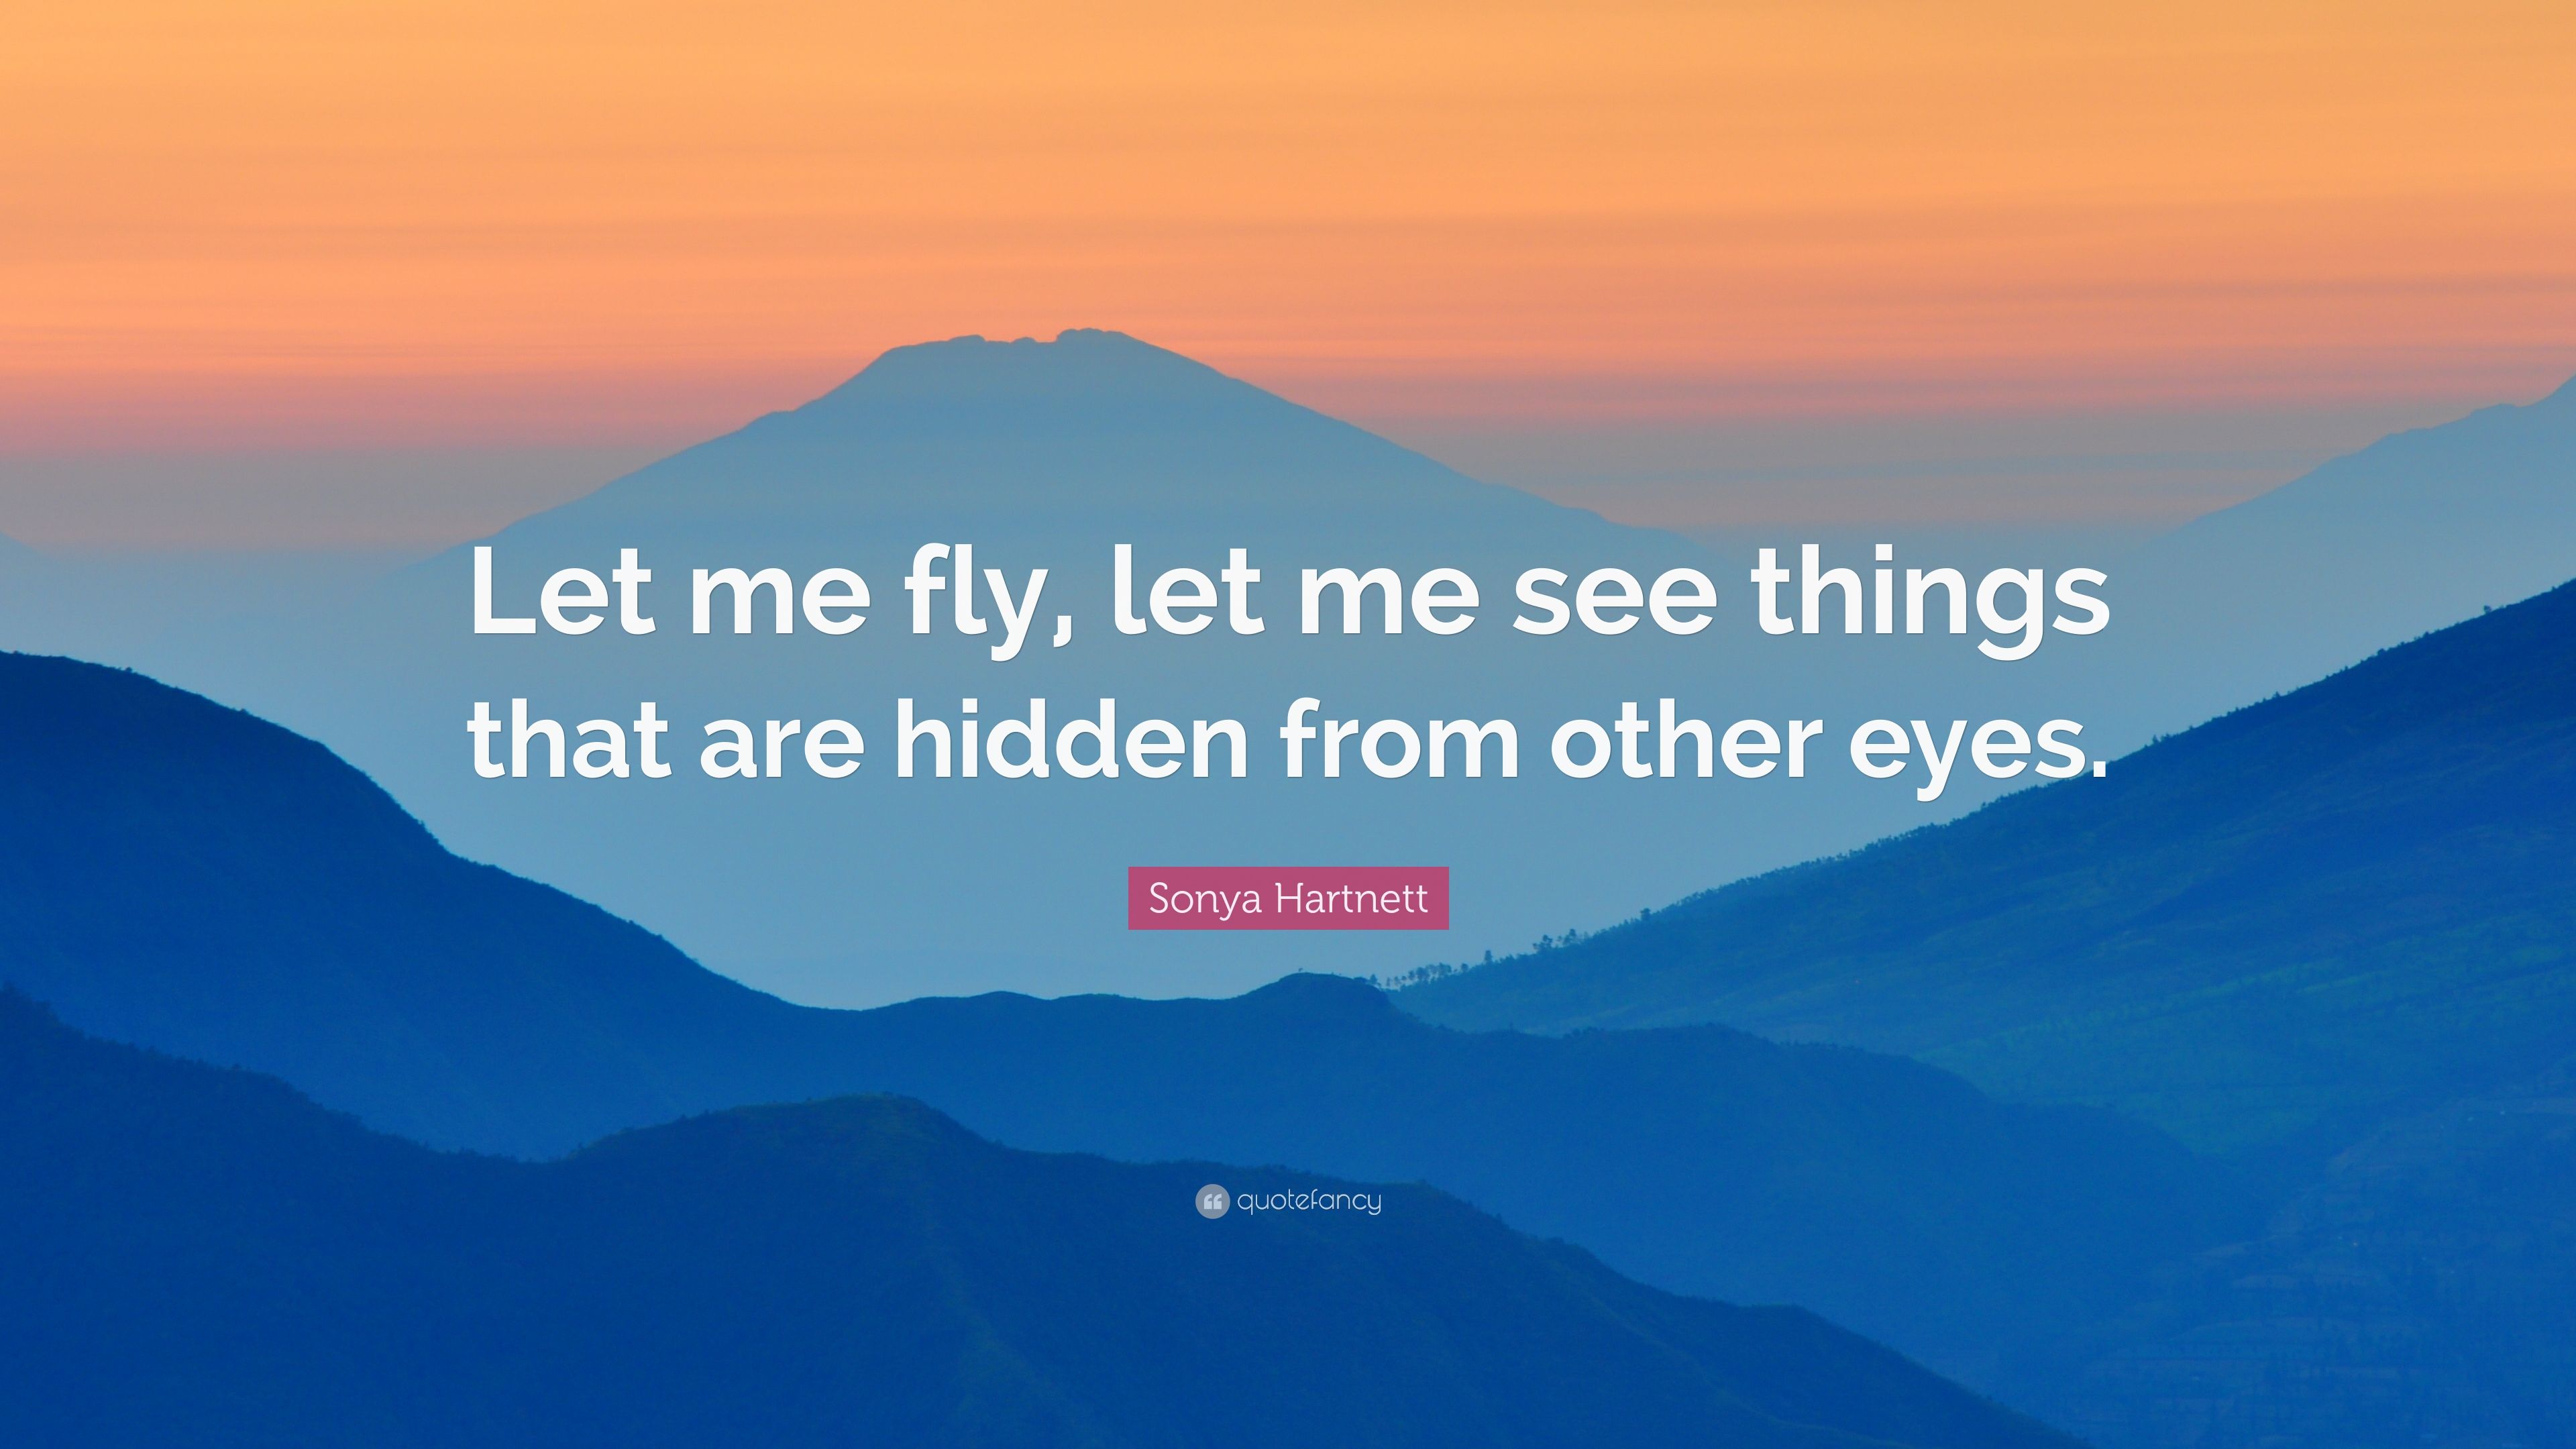 Sonya Hartnett Quote: “Let me fly, let me see things that are hidden ...